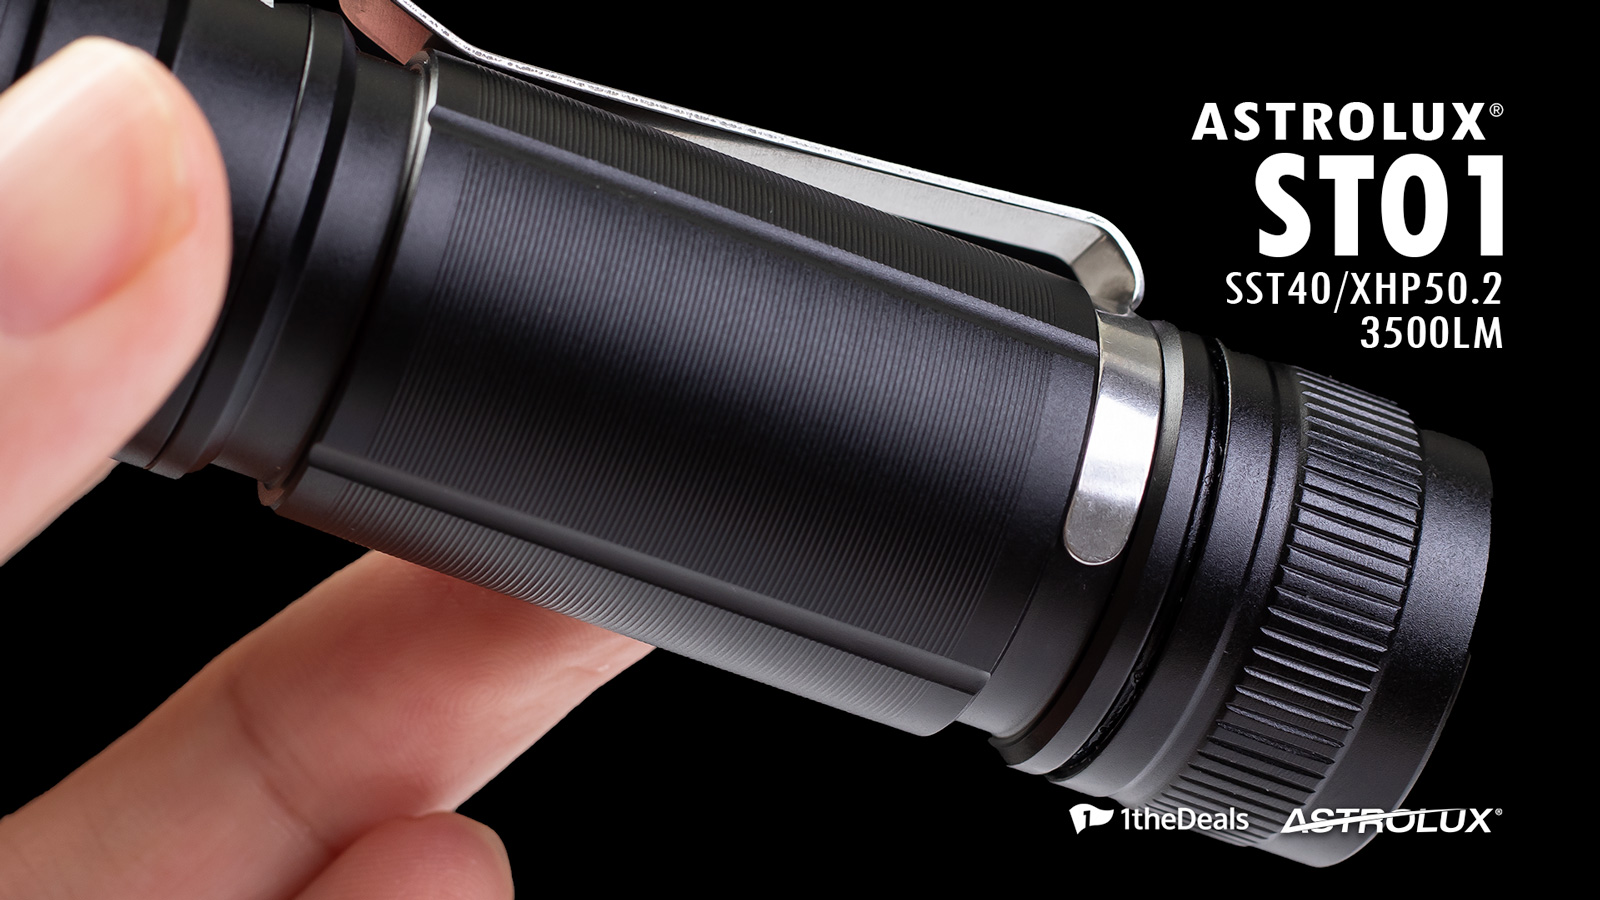 1theDeals Astrolux ST01 Flashlight